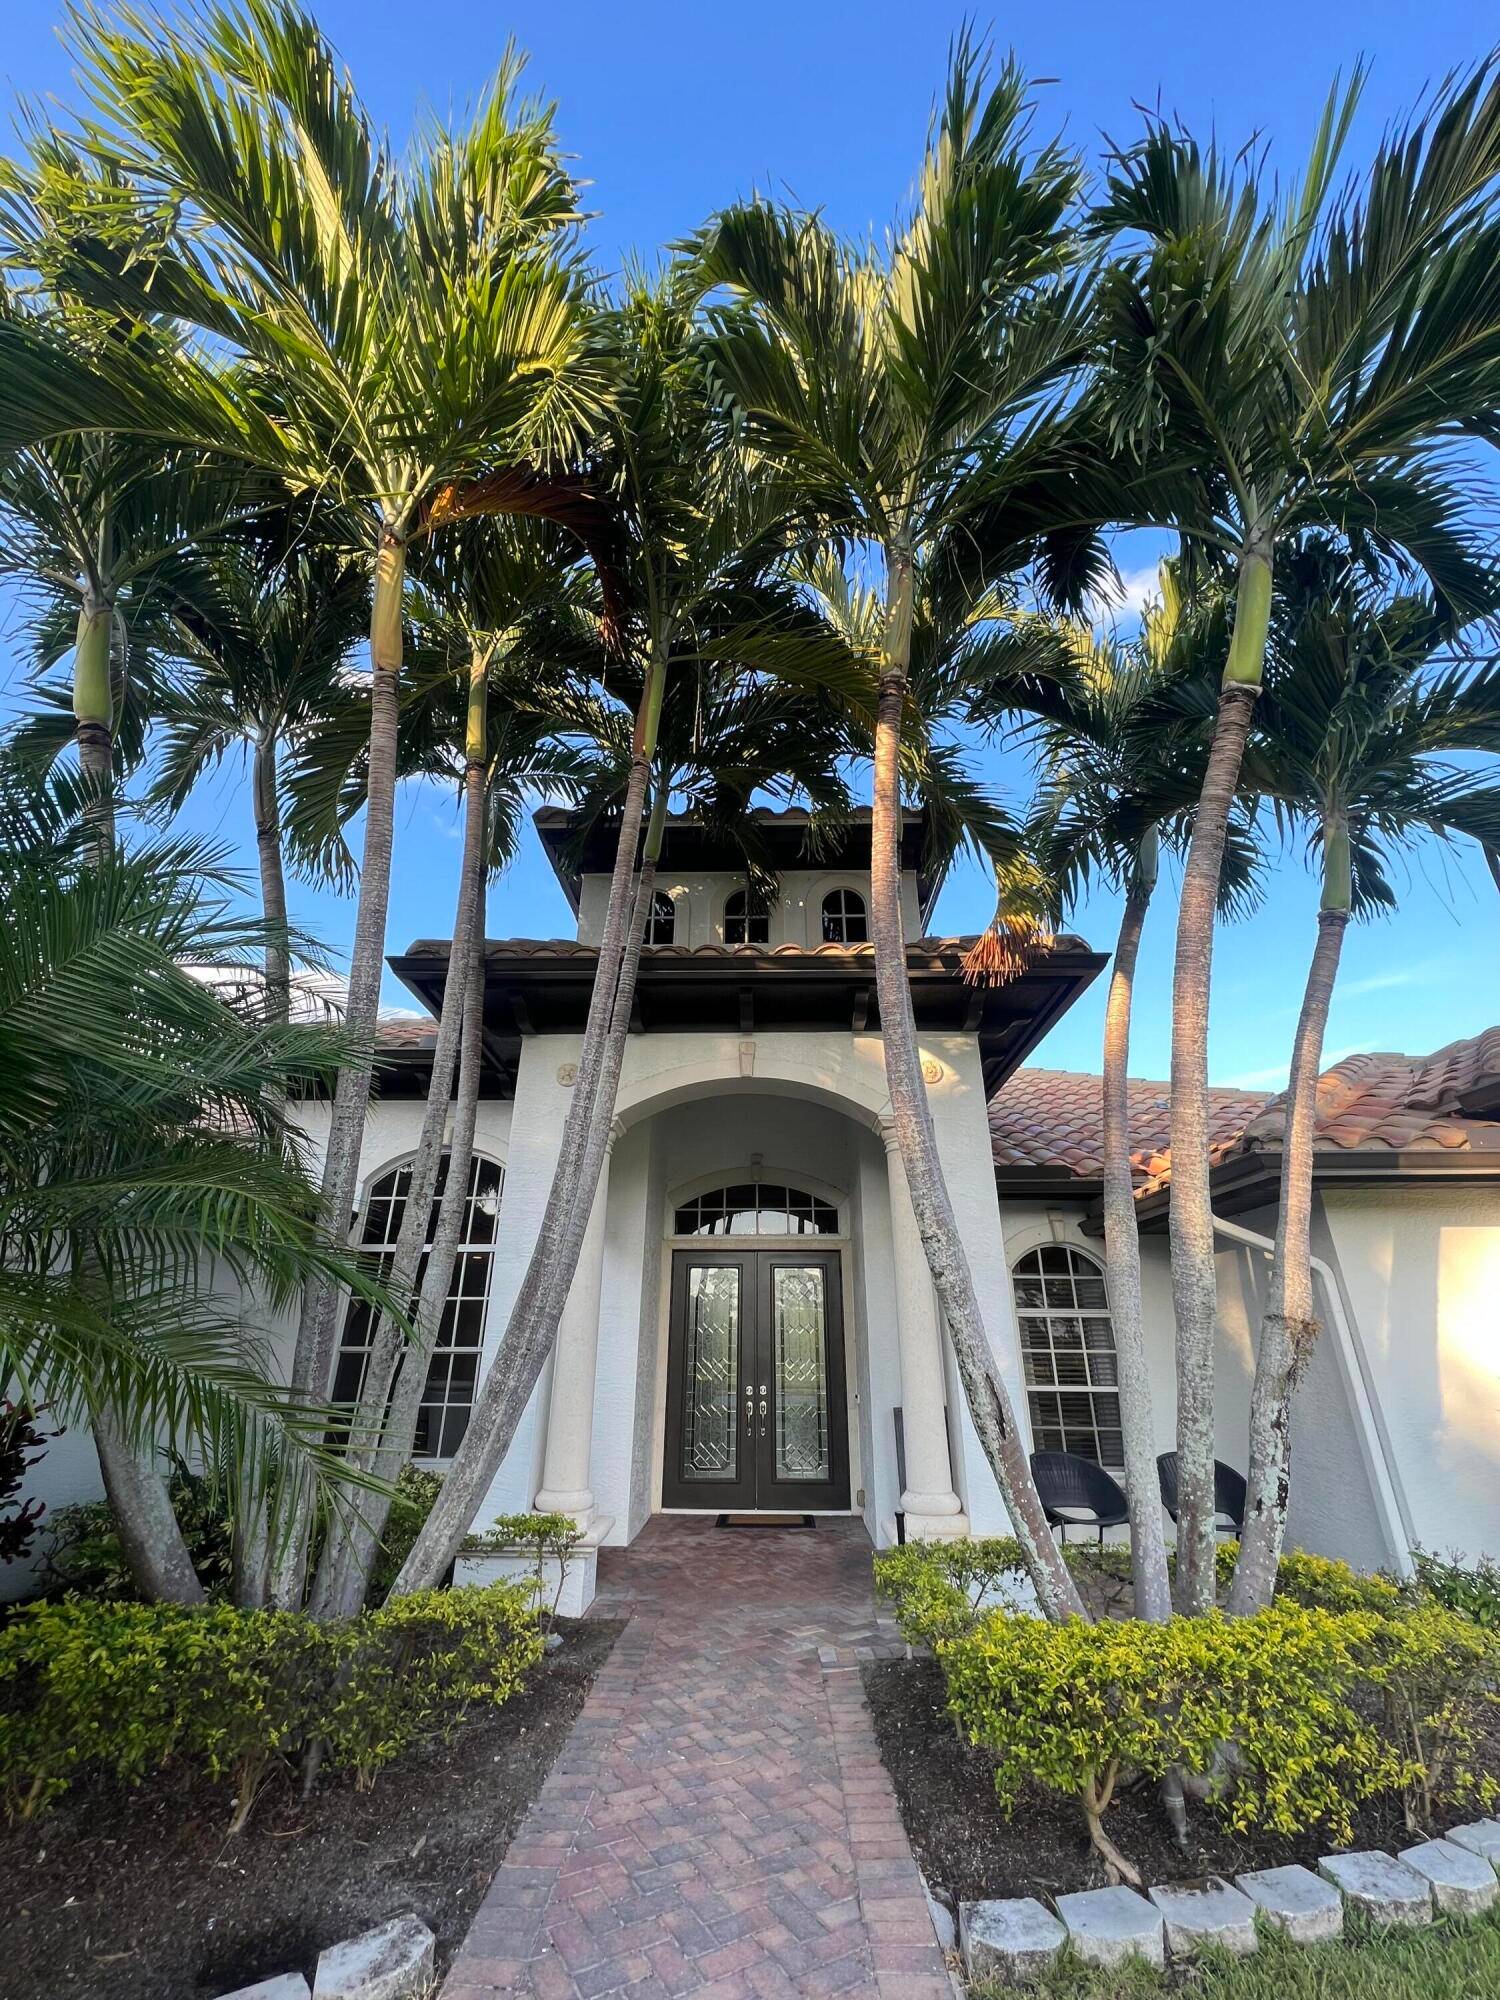 A magnificent five bedroom, four bathroom home with an office which can be a sixth bedroom, game room and pool, positioned on one of the finest lots in the neighborhood.